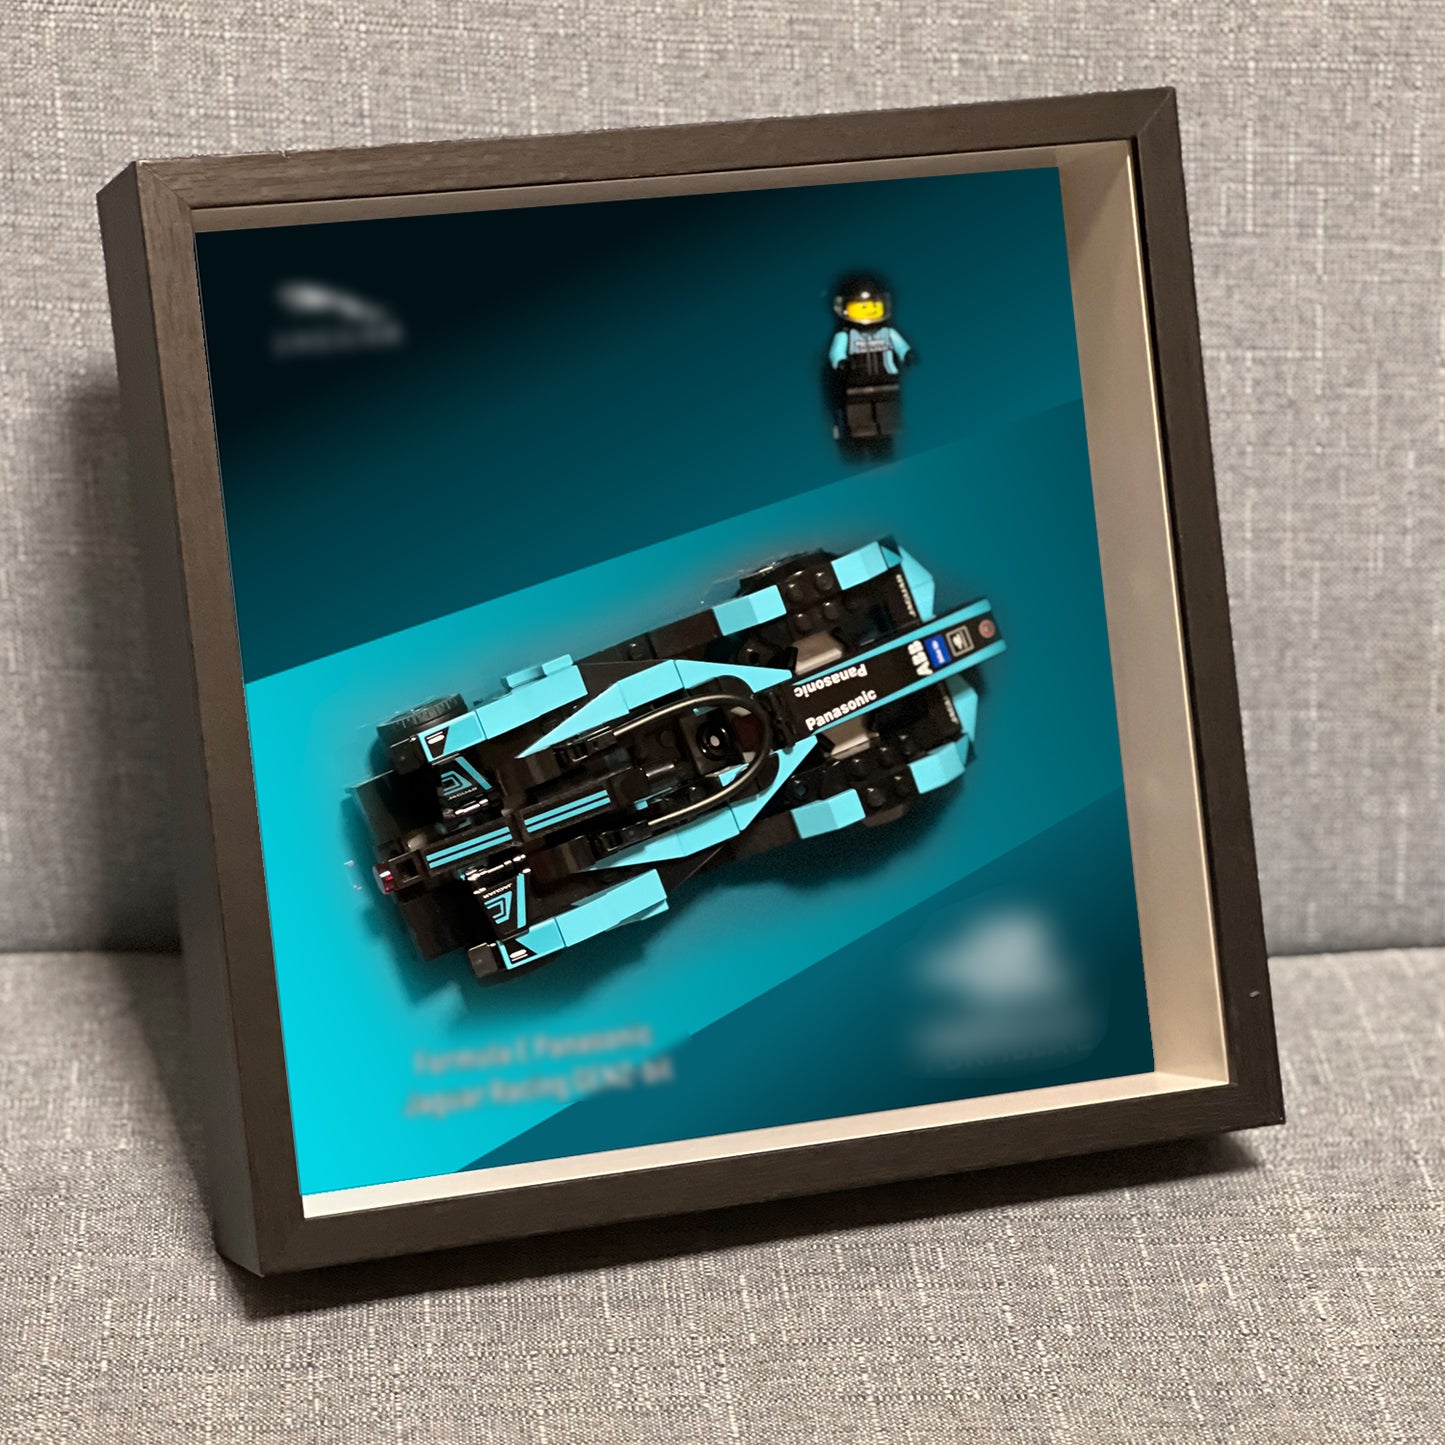 iLuane Display Wallboard for Lego Speed Champions Formula E Panasonic Jaguar Racing Gen2 car 76898-1, Adult Collectibles Lego Car Wall Mount, Gifts for Lego Lovers(Only Display Wallboard)